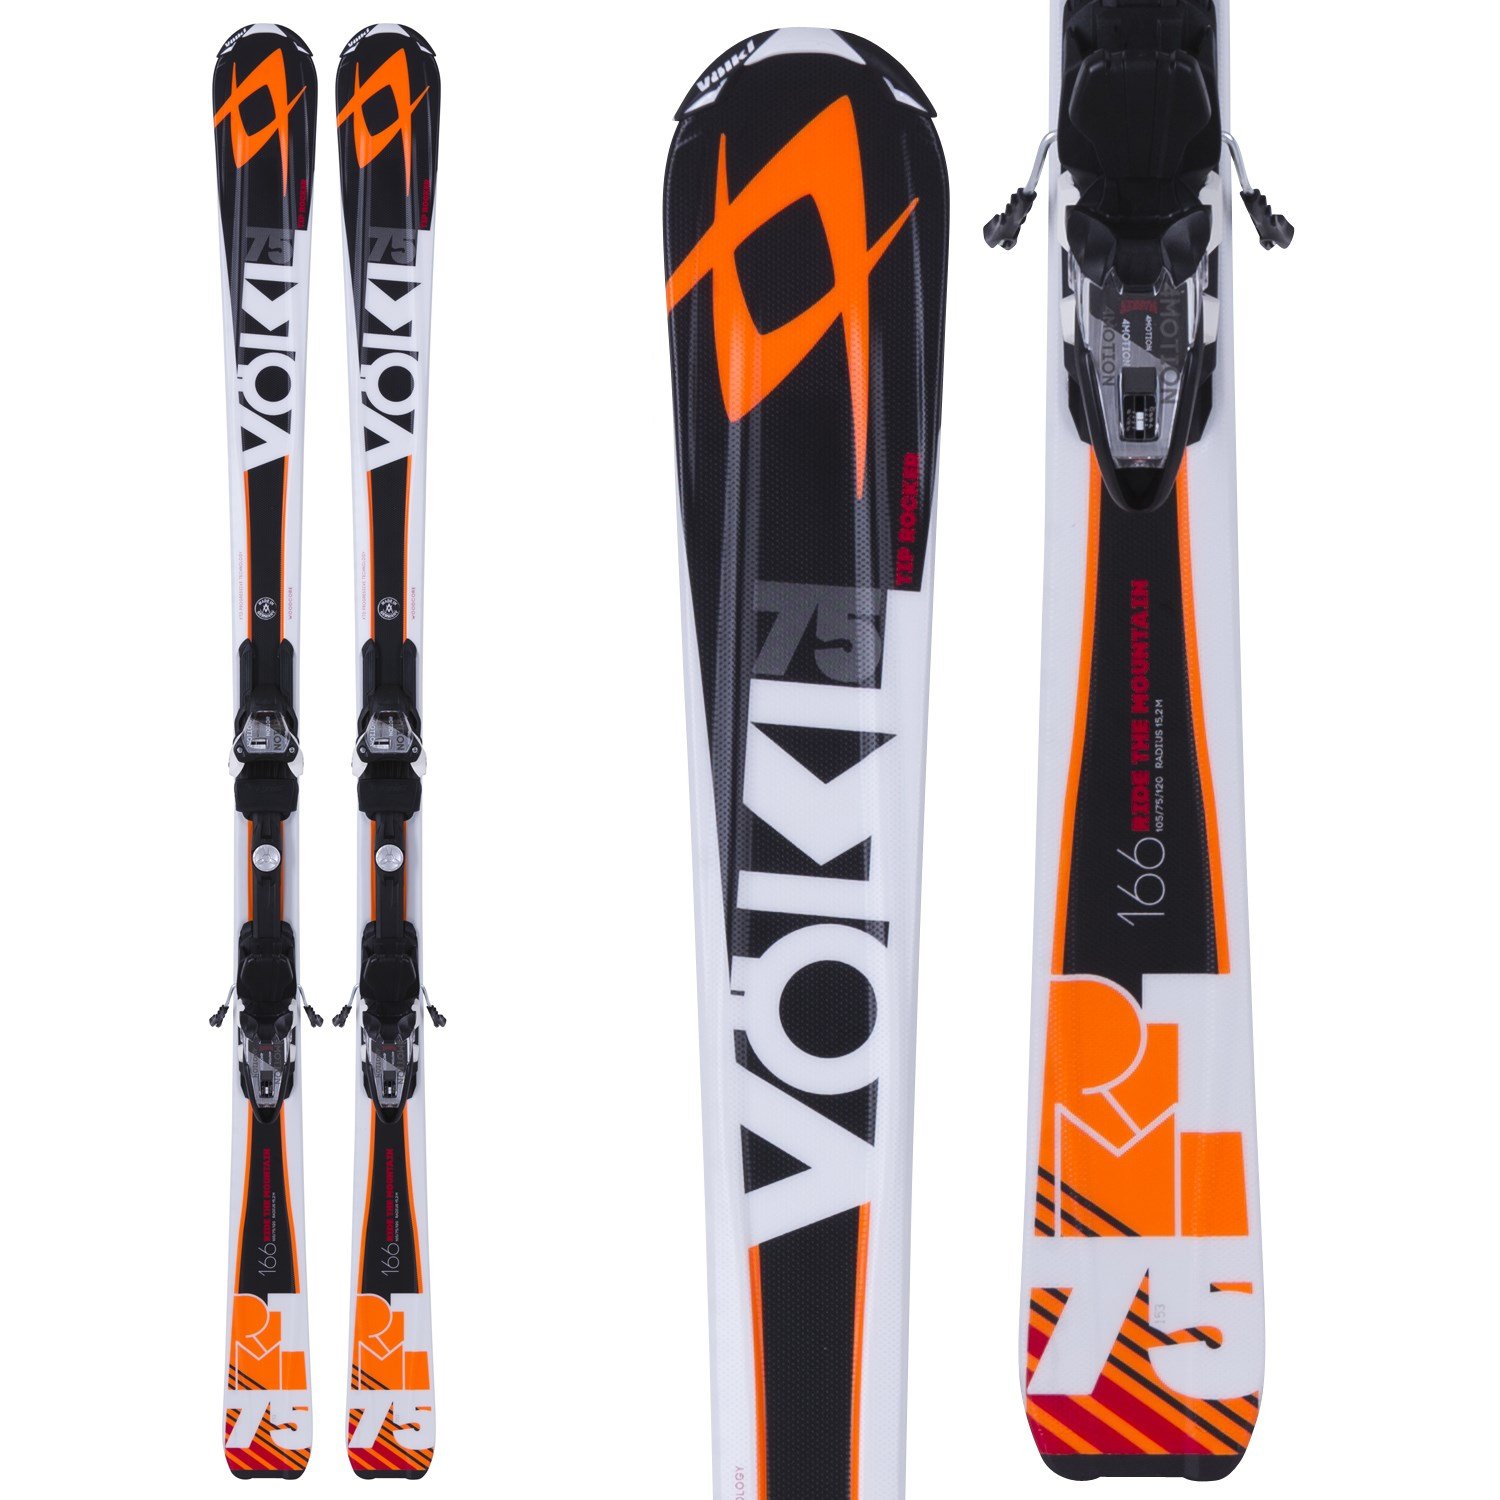 Details about   Volkl RTM Jr Skis & Marker 4.5 Bindings Tuned Waxed  80,90,100,110 cm Kids Youth 